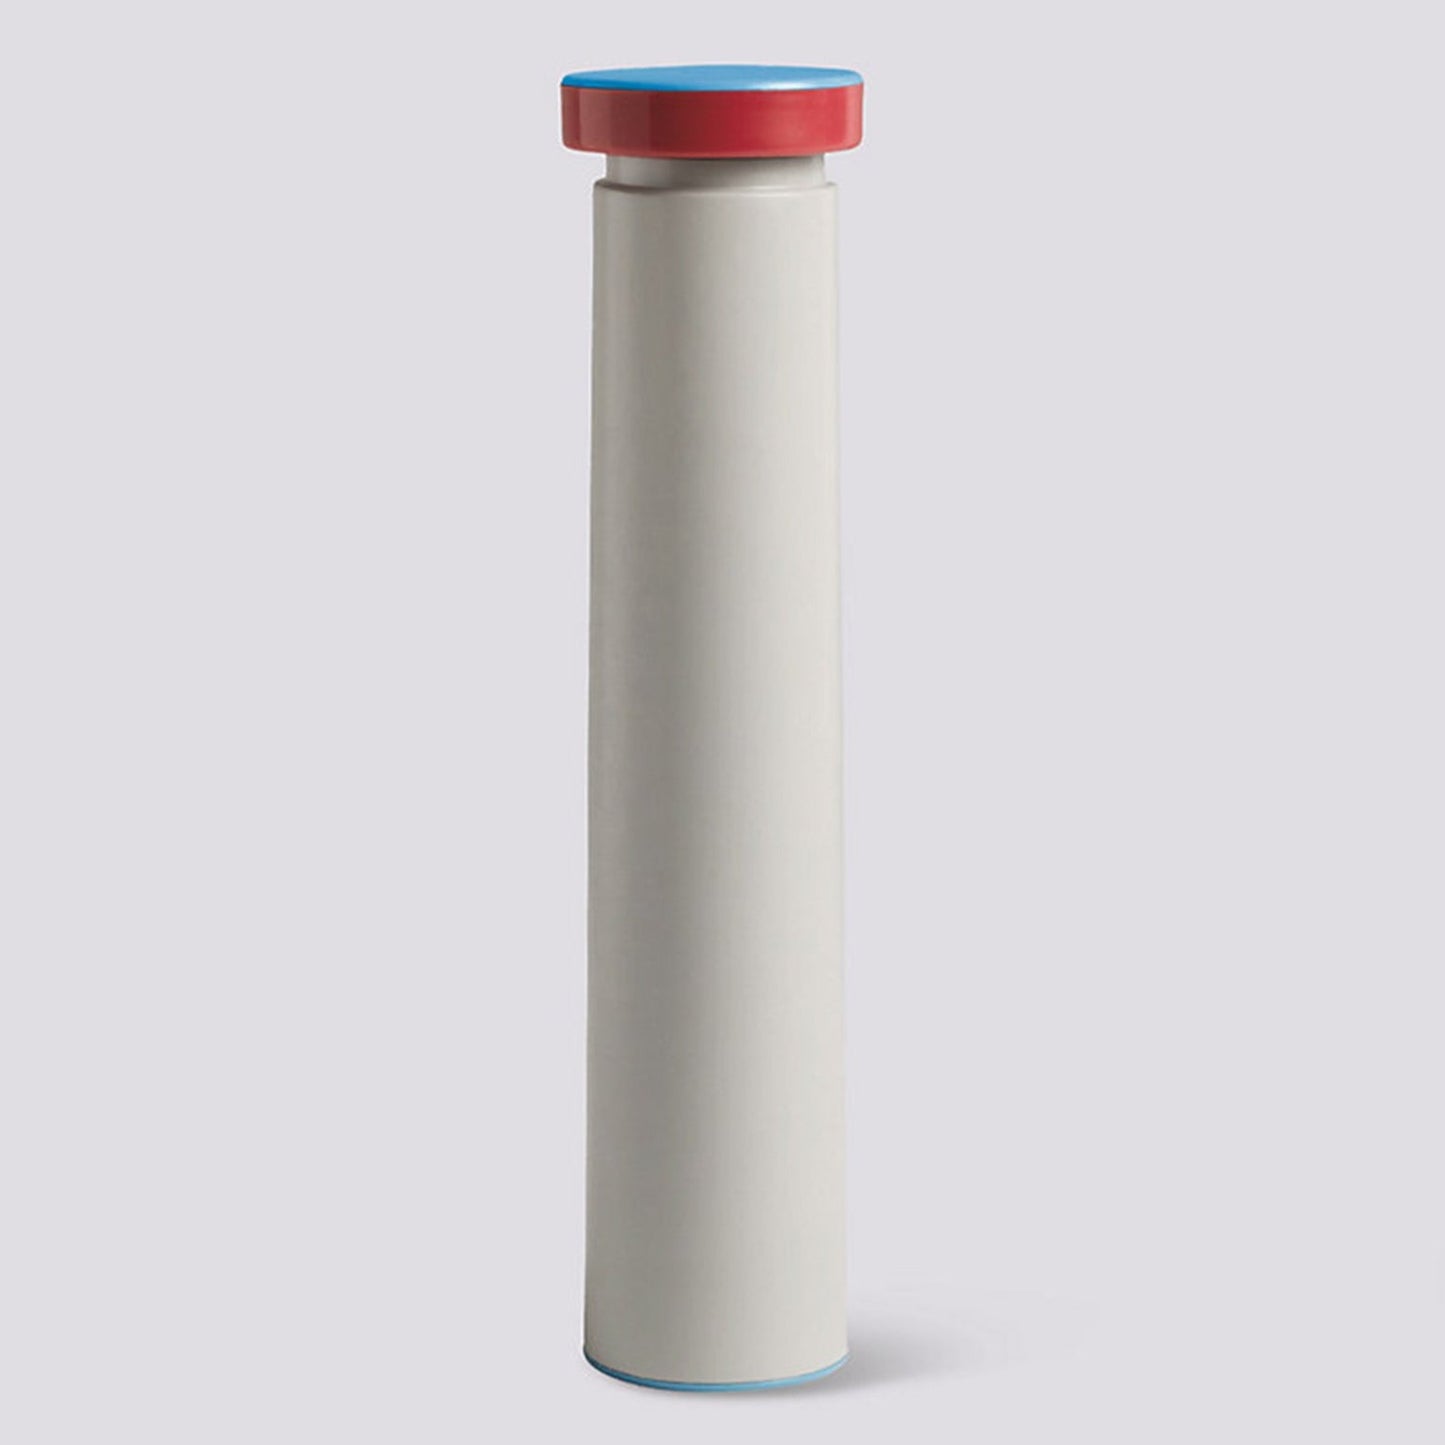 Sowden Salt & Pepper Shaker in grey from HAY brand. Available at Easy Tiger Goods Toronto.